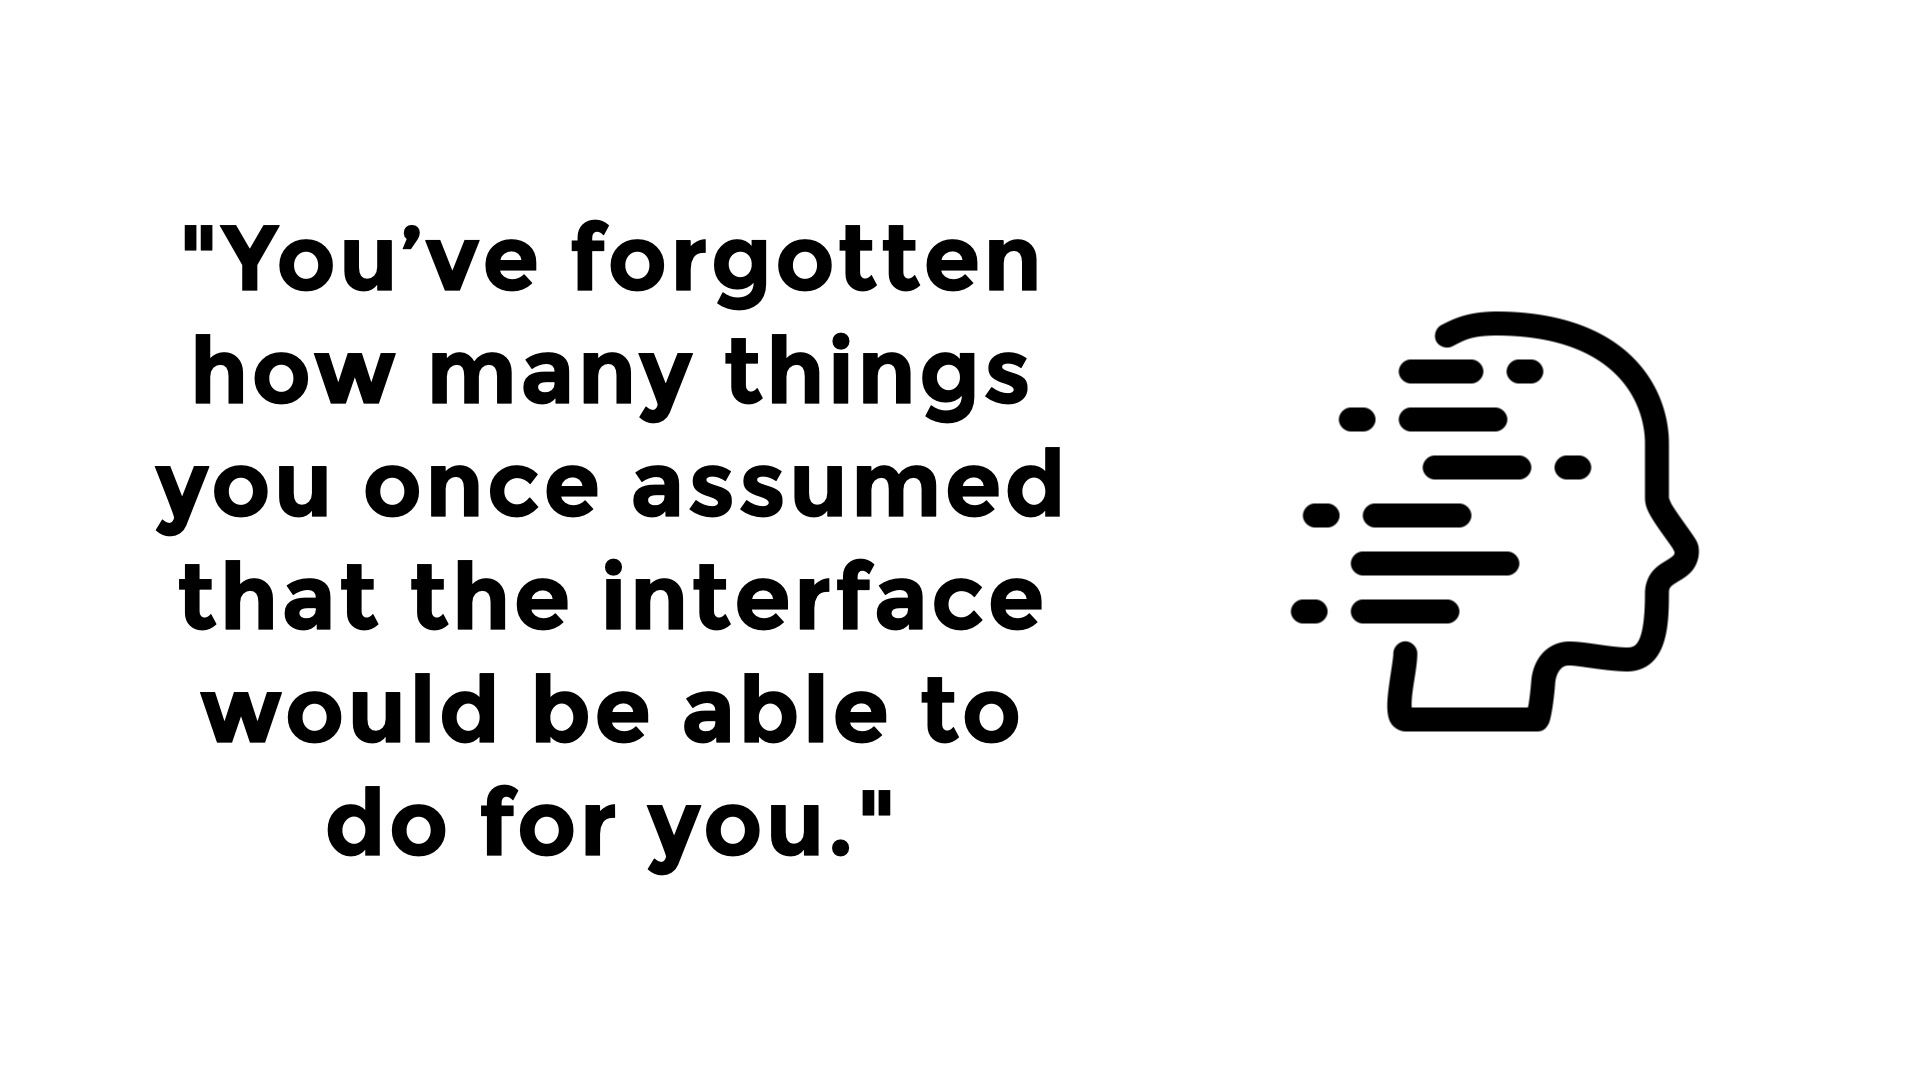 Quotation: 'You’ve forgotten how many things you once assumed that the interface would be able to do for you.'